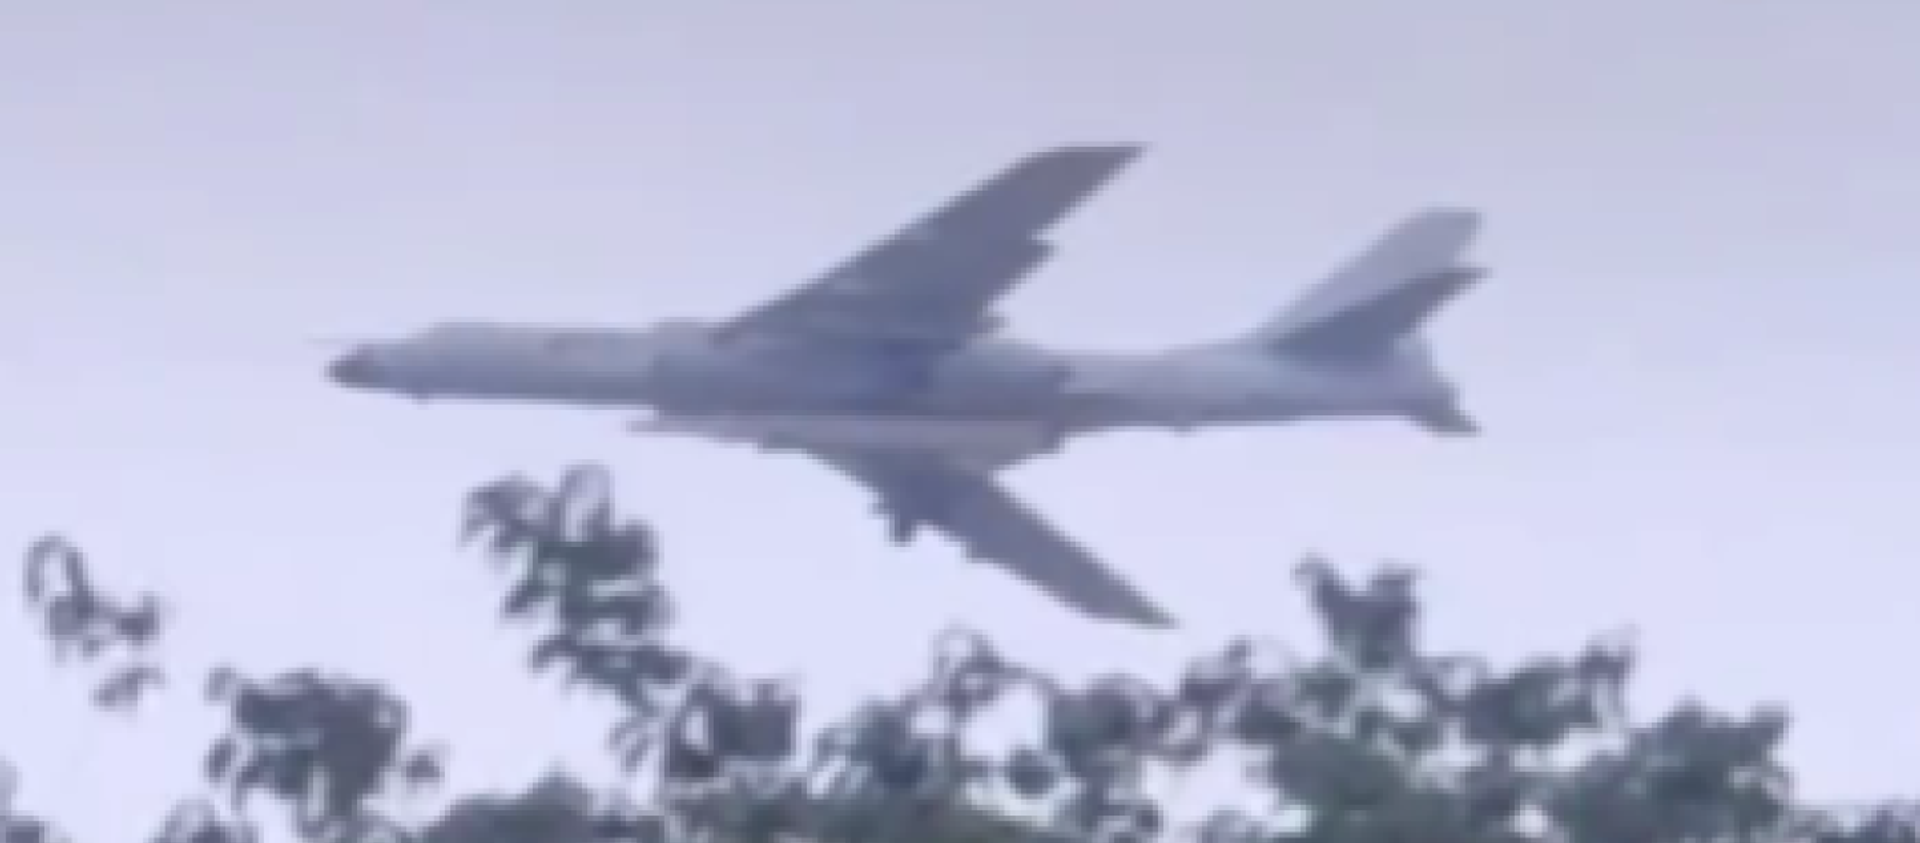 A Chinese Xian H-6N bomber is spotted carrying a ballistic missile, possibly a DF-17 hypersonic glide vehicle, in a video posted to Chinese social media - Sputnik International, 1920, 06.11.2020